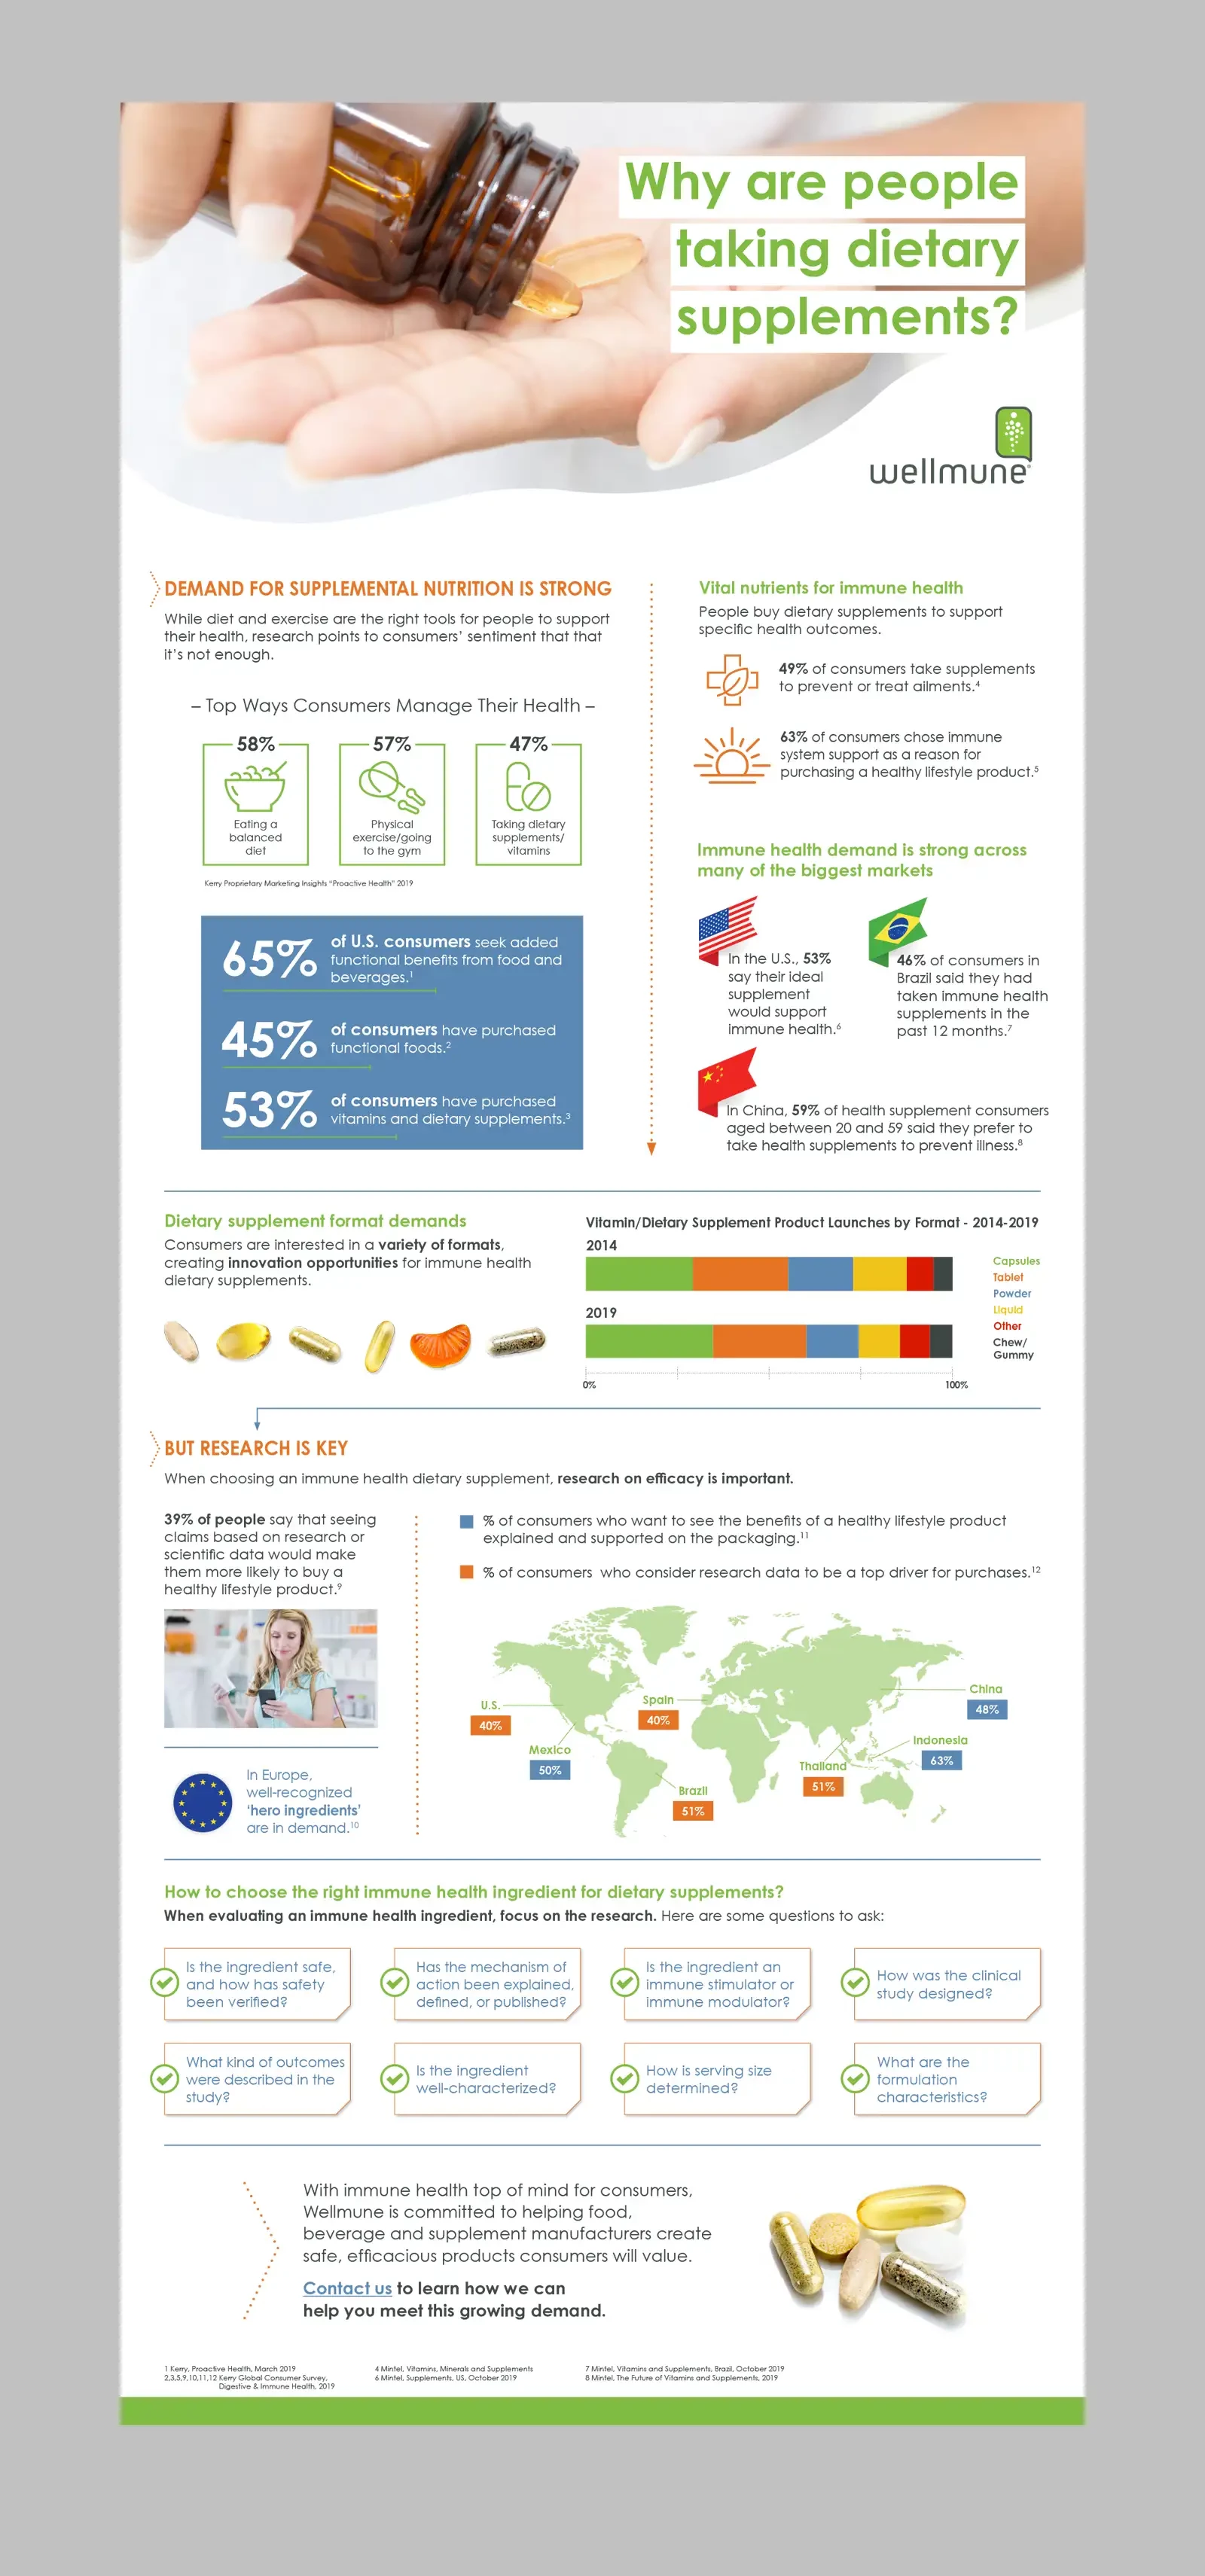 Wellmune Dietary Supplements infographic